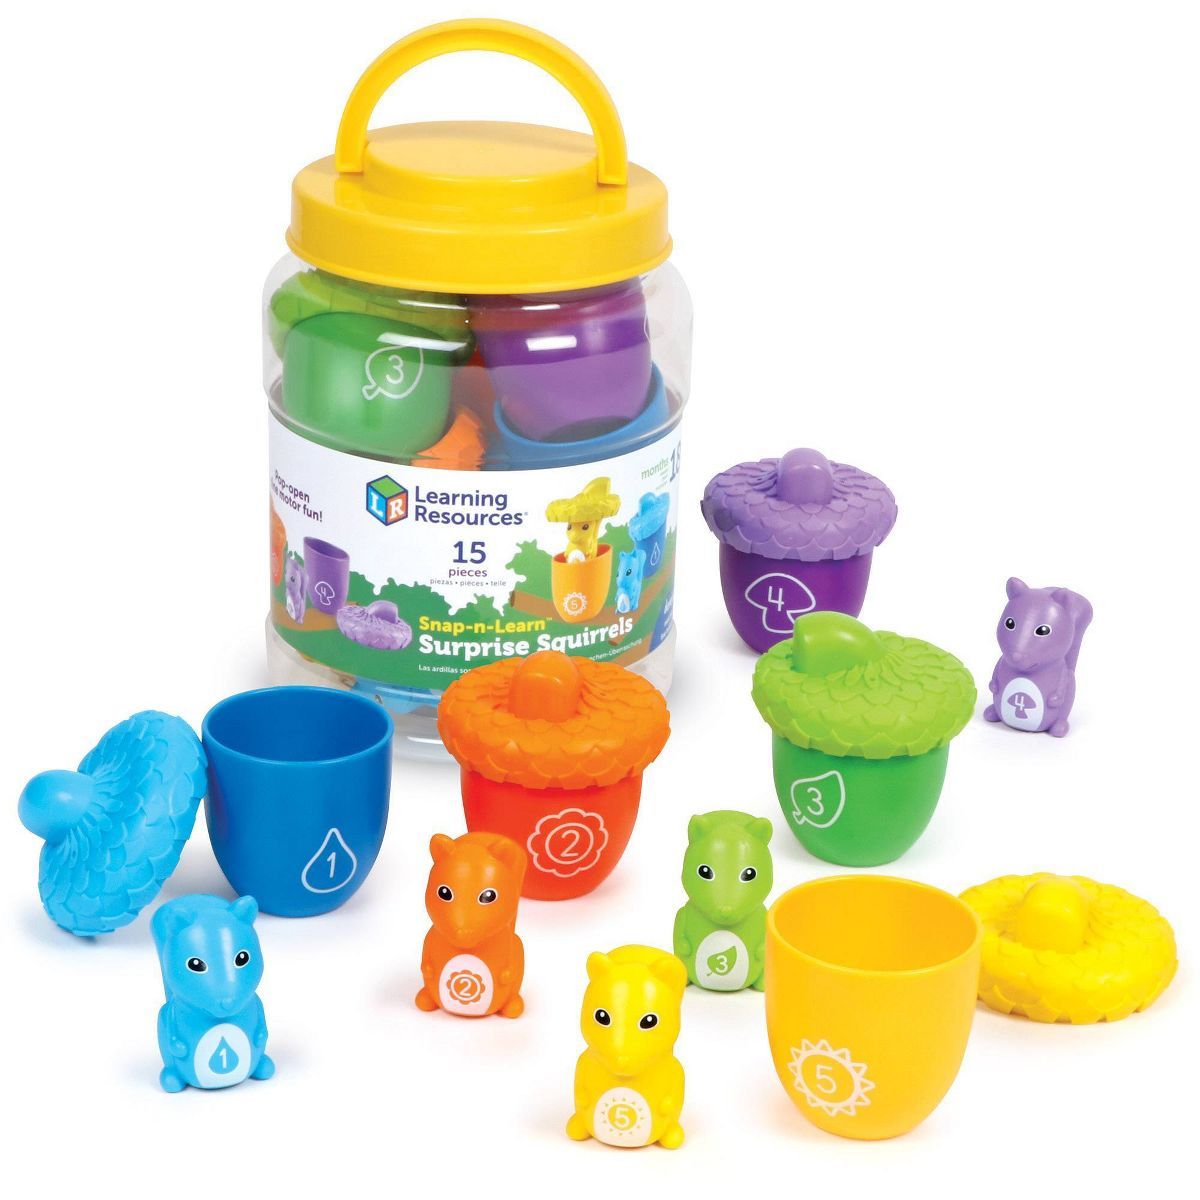 Learning Resources Snap-n-Learn Surprise Squirrels | Target